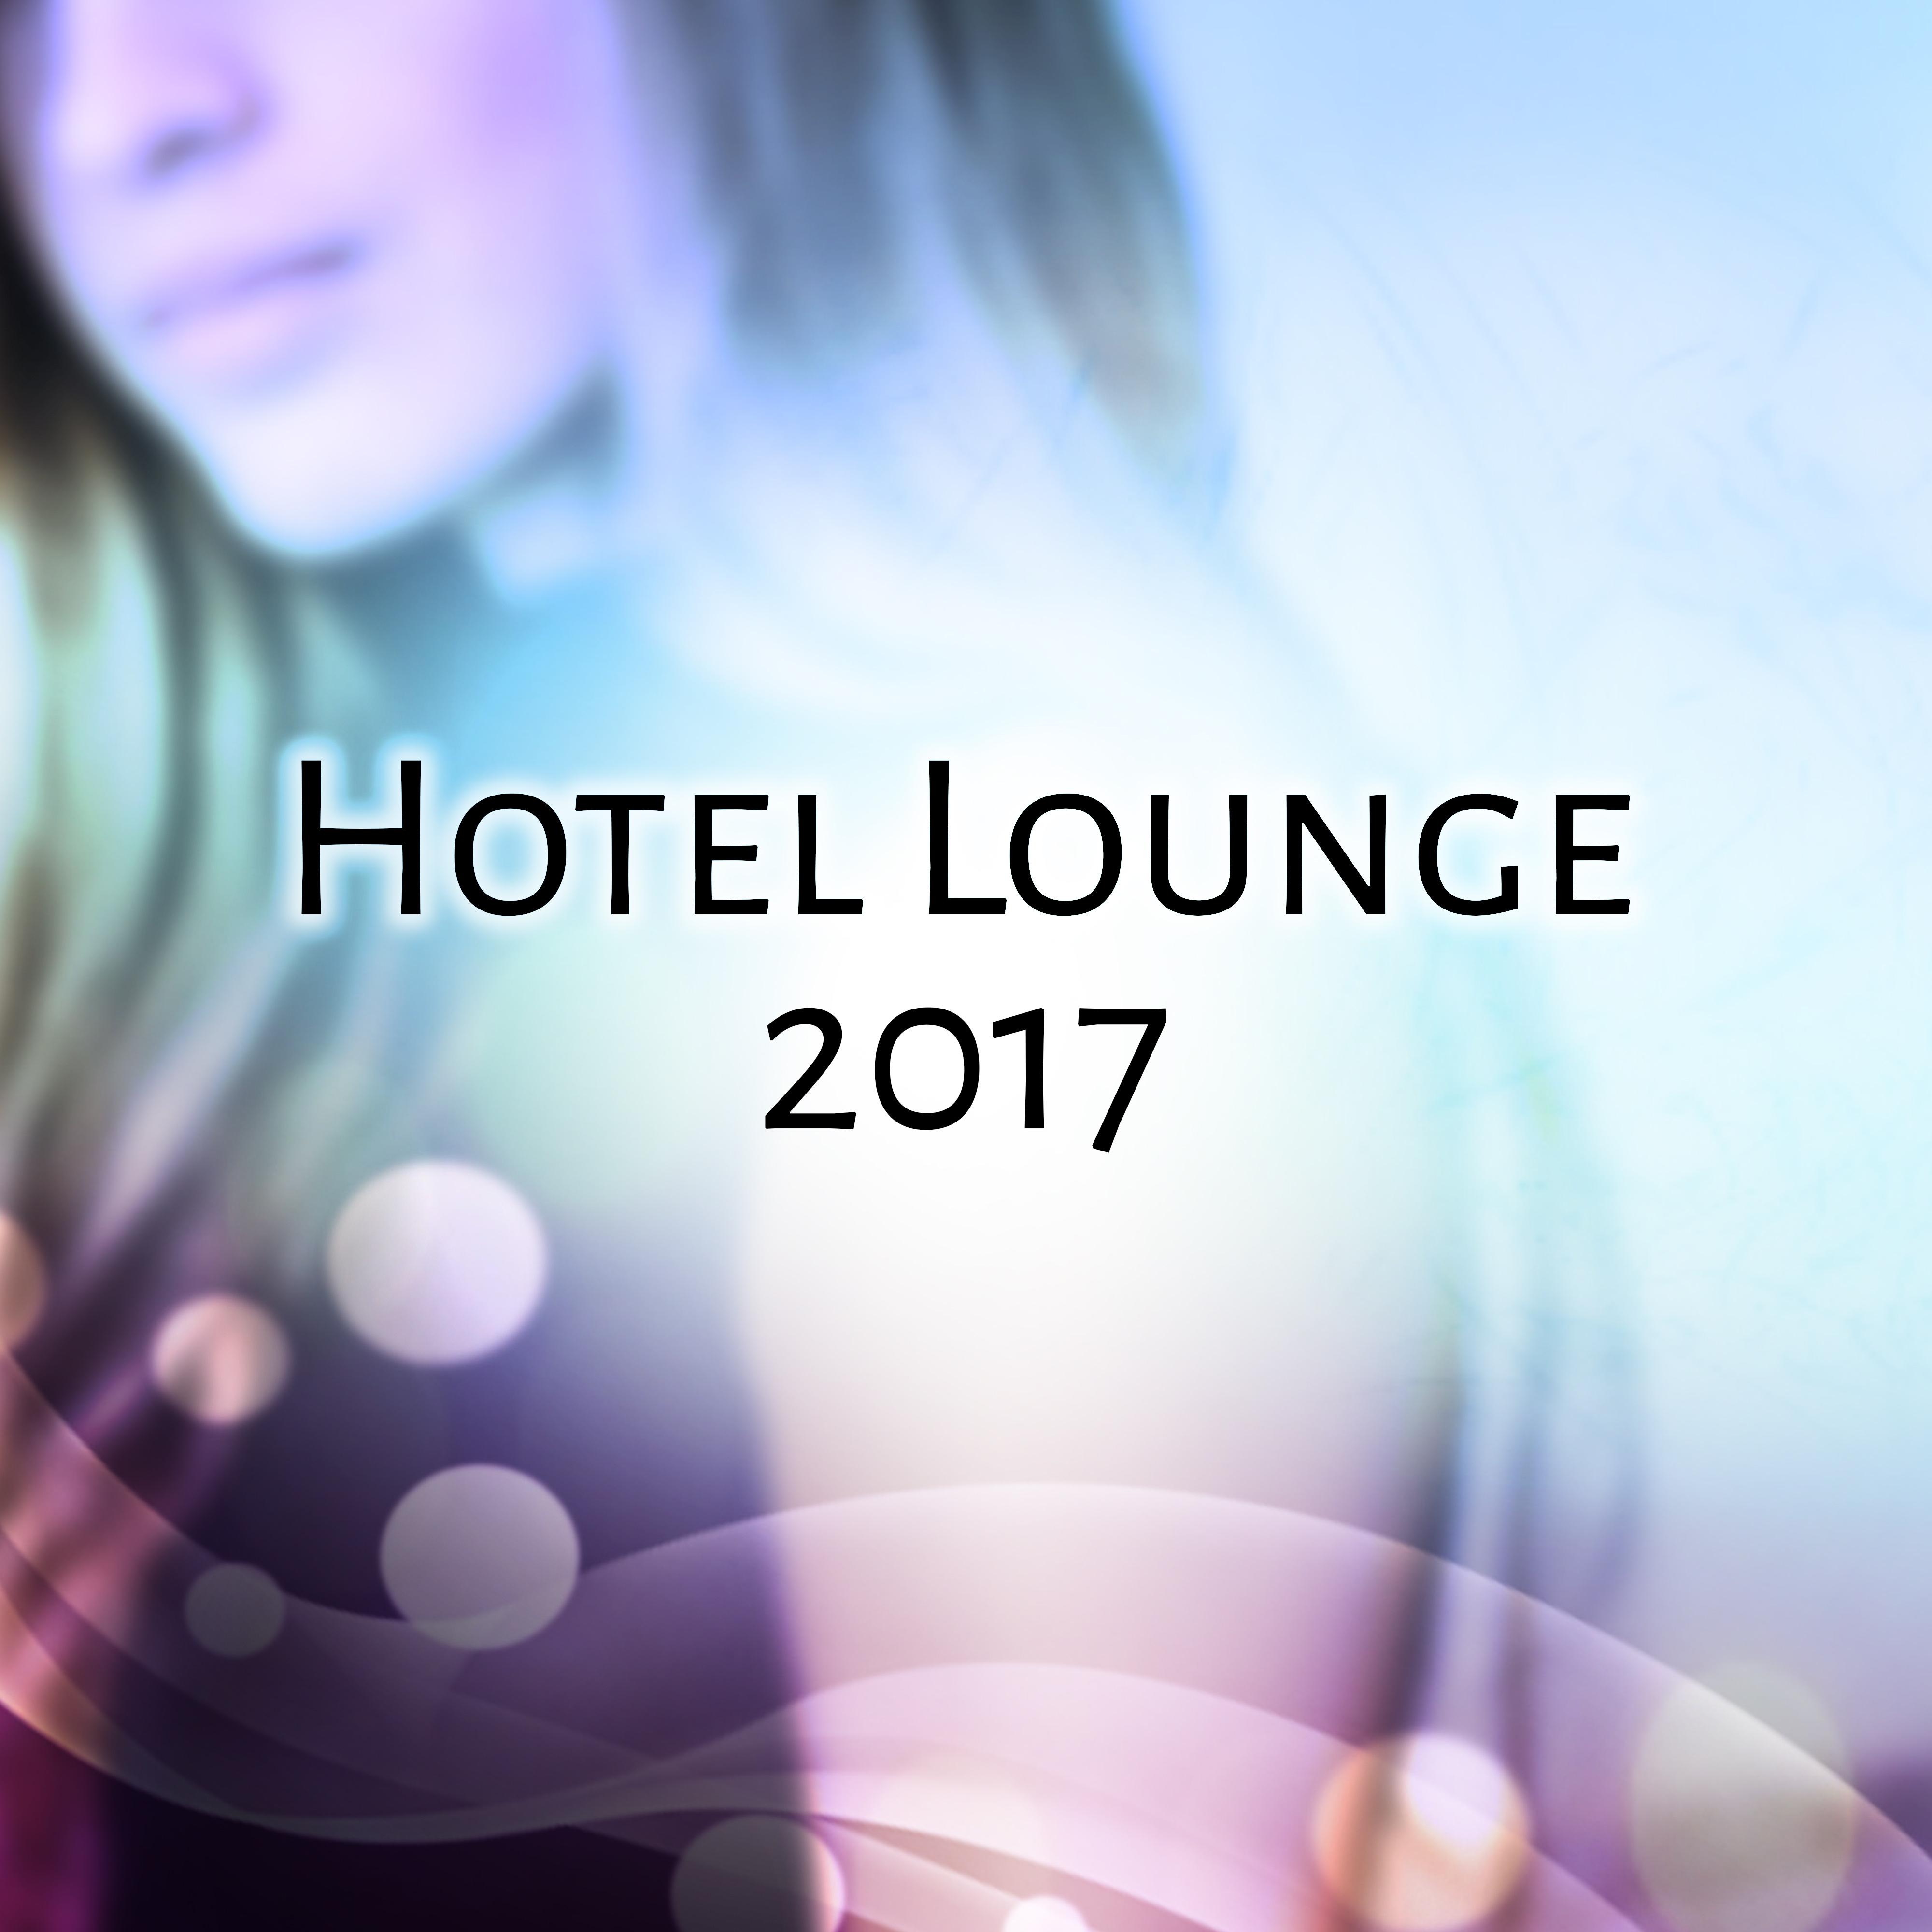 Hotel Lounge 2017 – Ibiza Chill Out, Deep Relaxation, **** Chill, Electronic Music, Tropical Chil